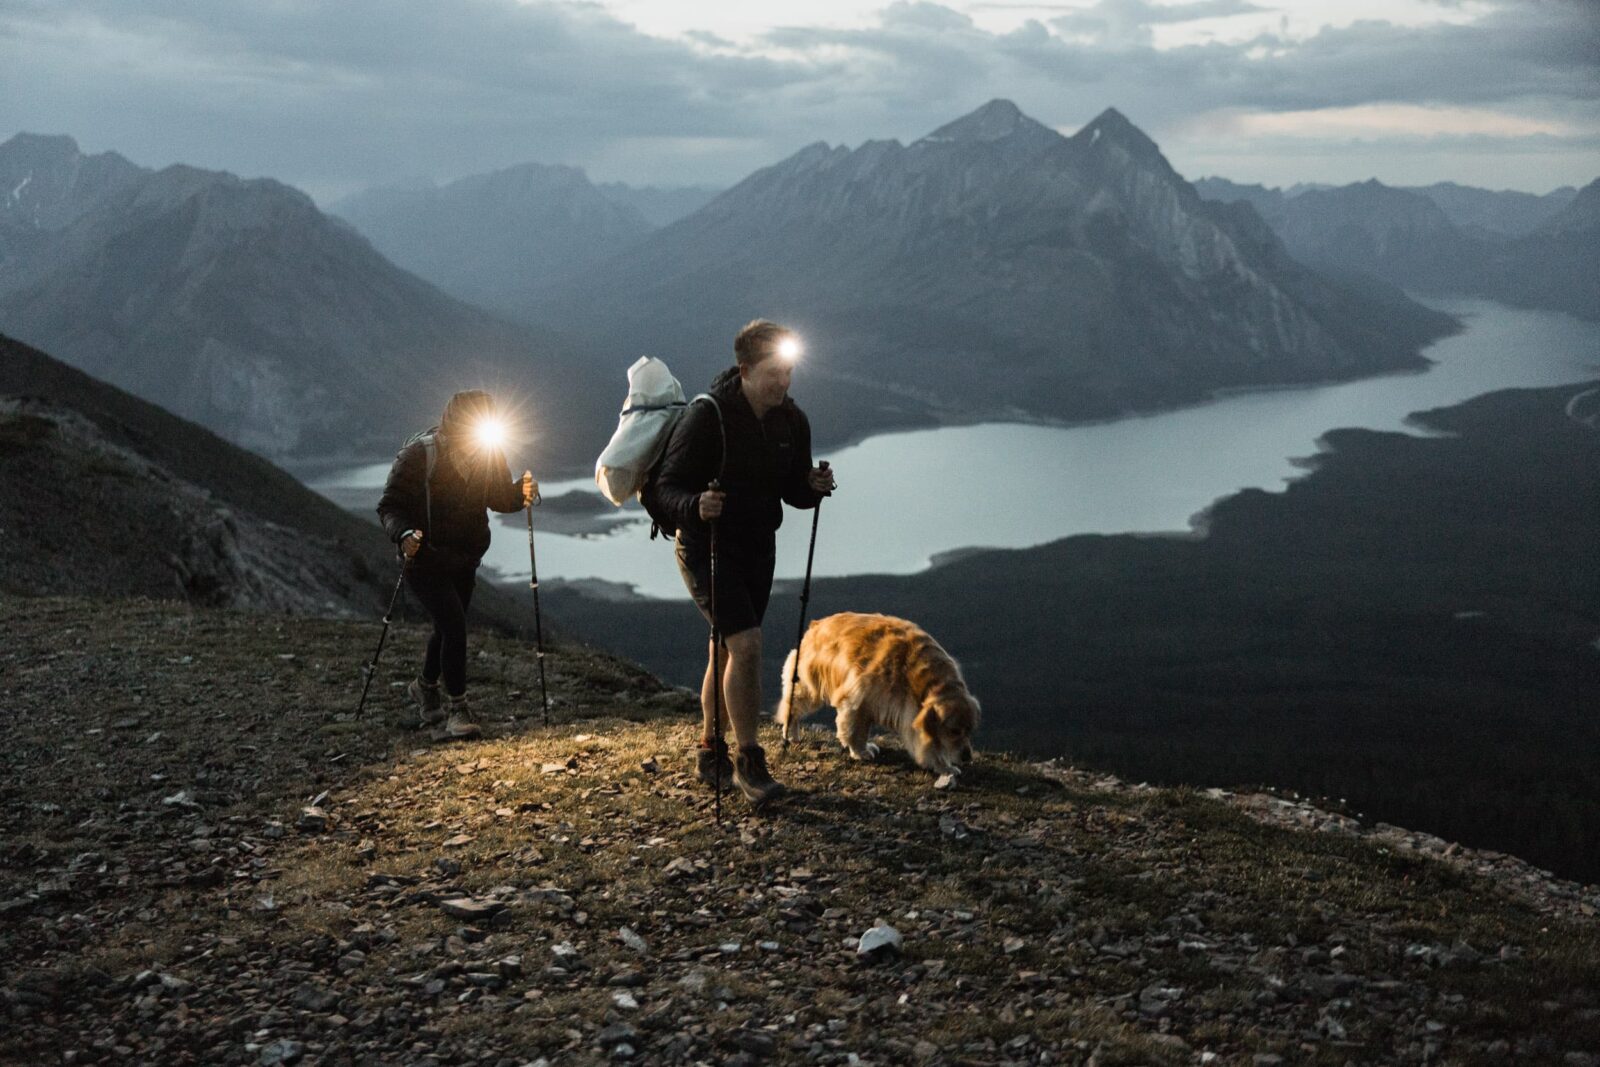 hiking by headlamp in the mountains